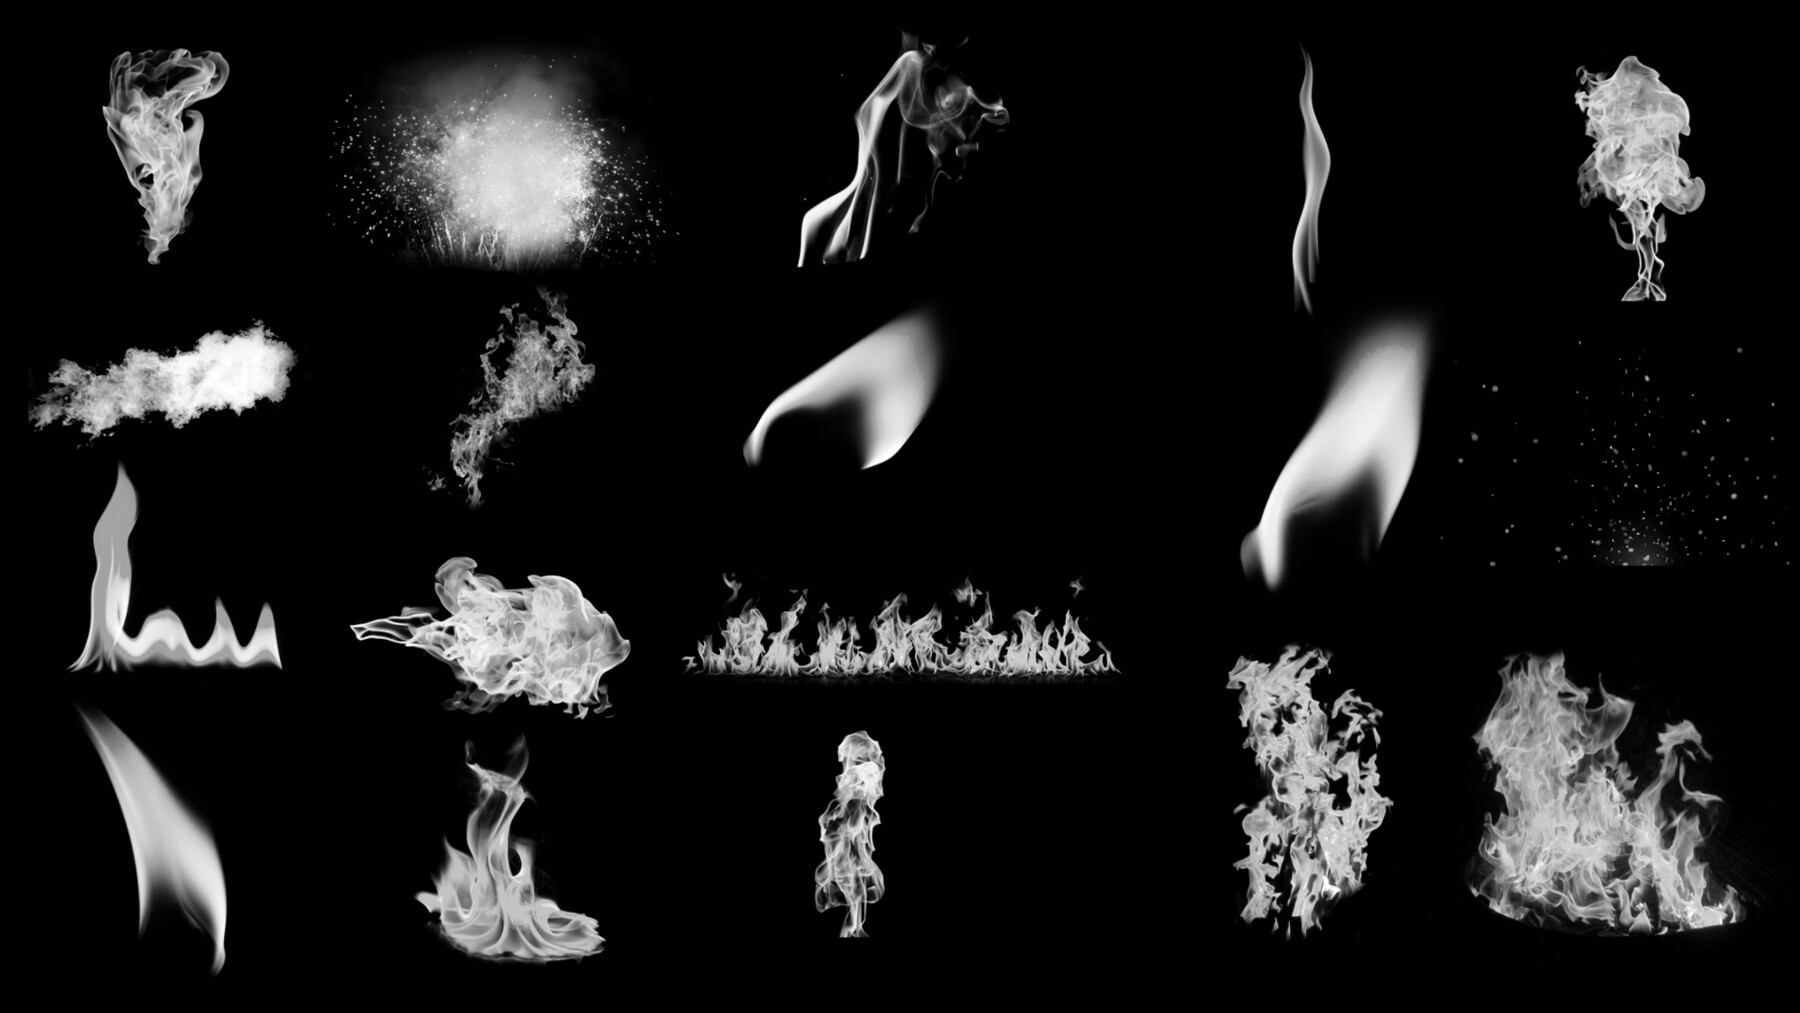 ArtStation - 30 Fire Flame Brushes For Procreate and Photoshop | Brushes